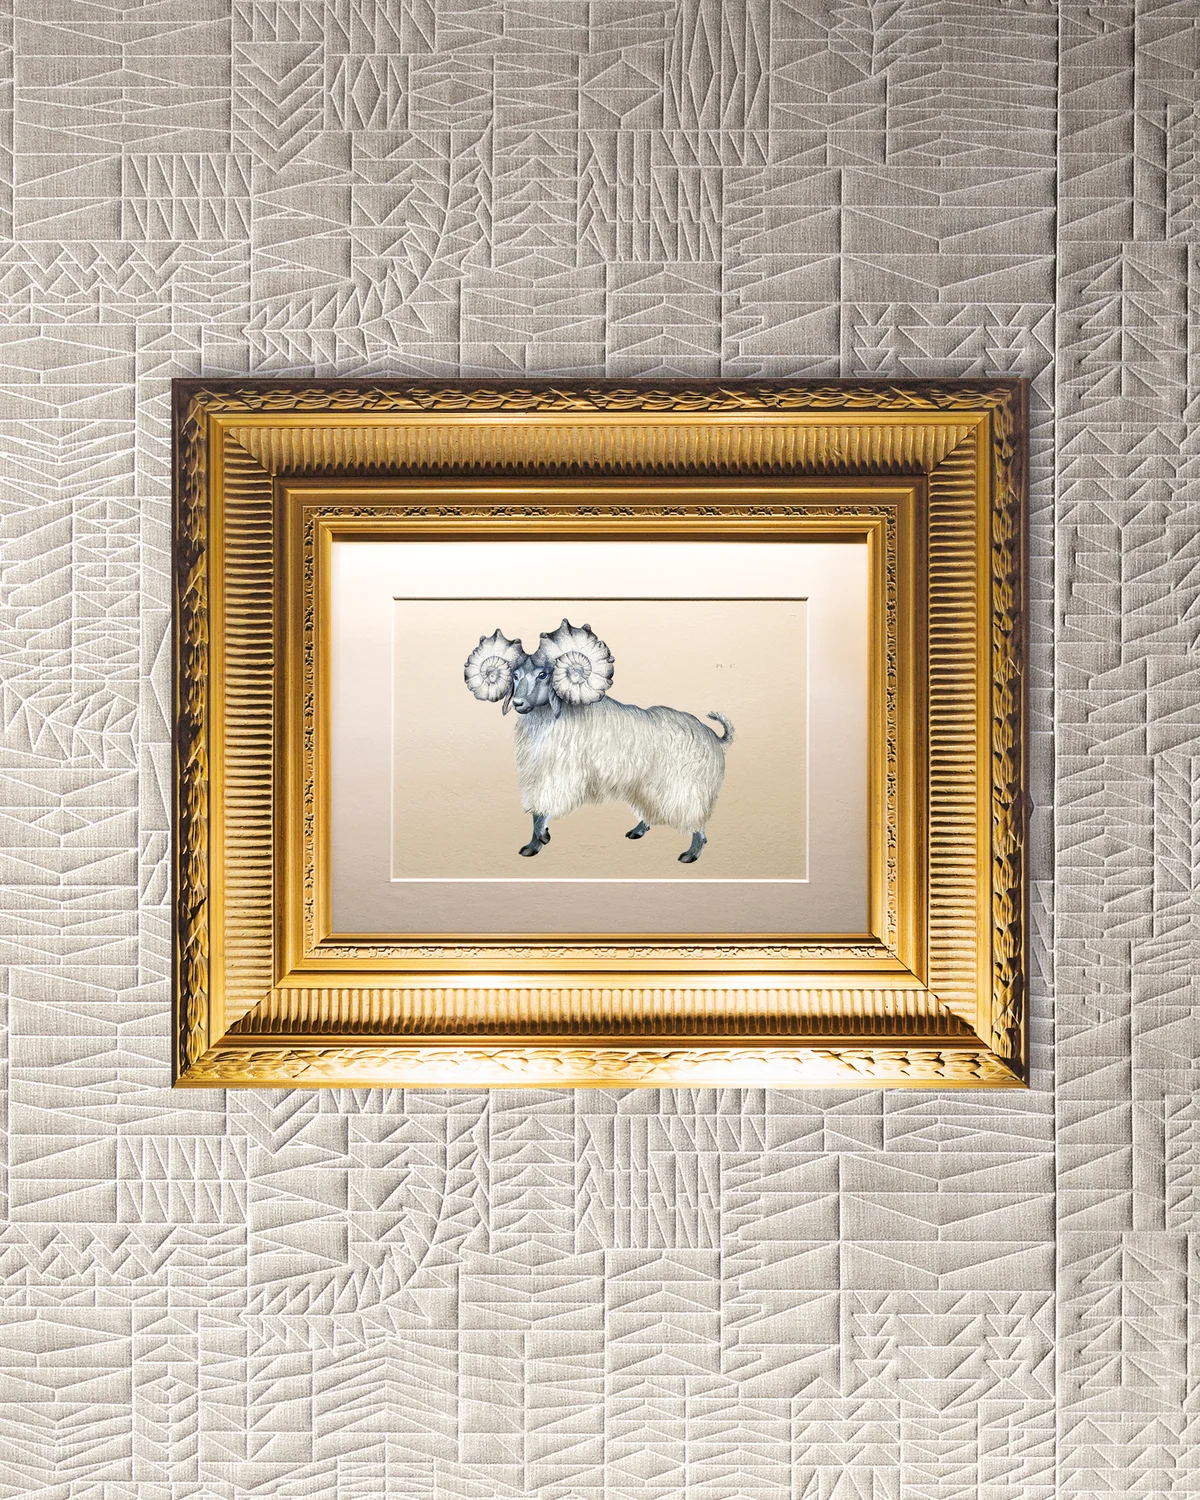 Pogo Goat Wallcovering with drawing of animal in frame